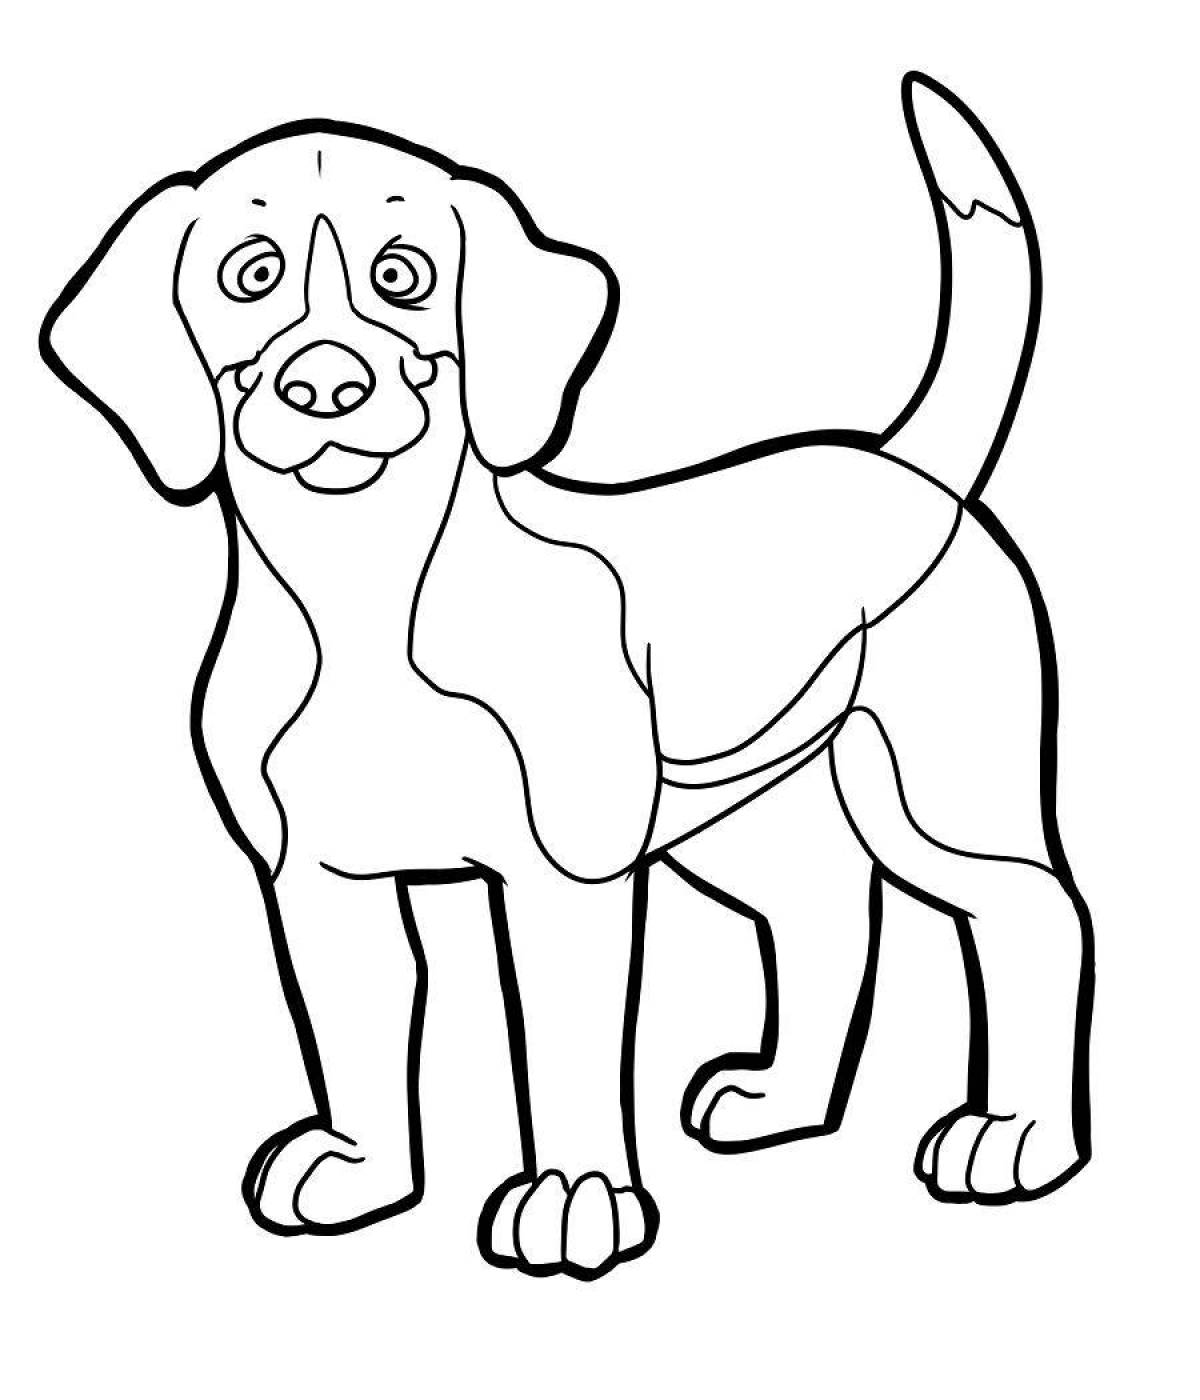 Complex coloring drawing of a dog